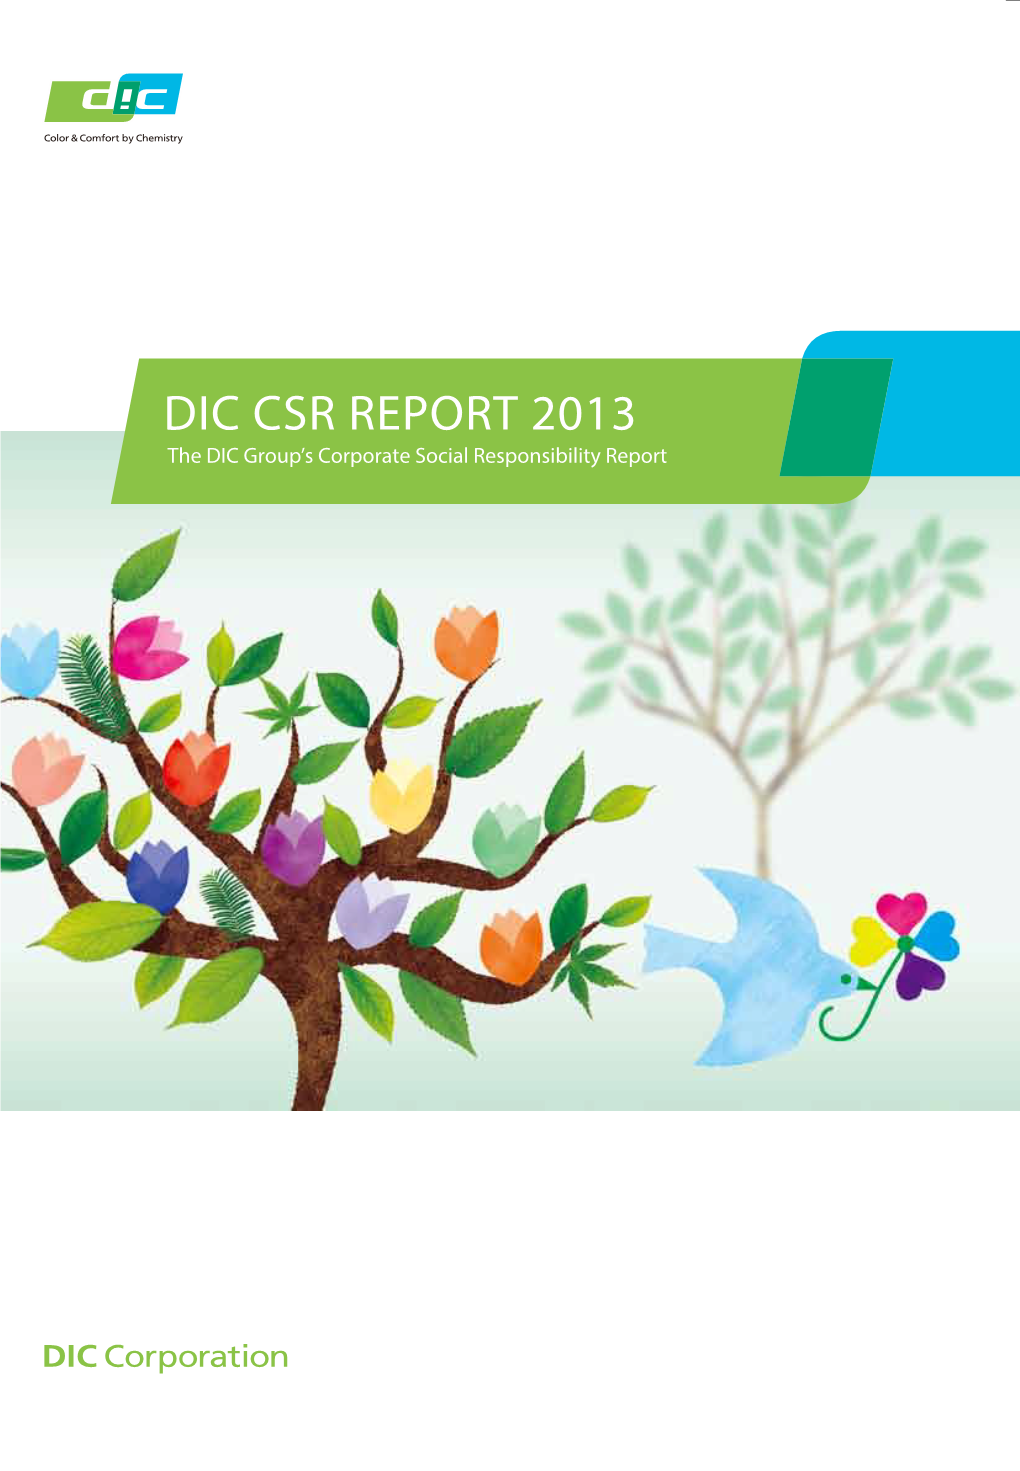 Download the Entire Document of CSR Report 2013